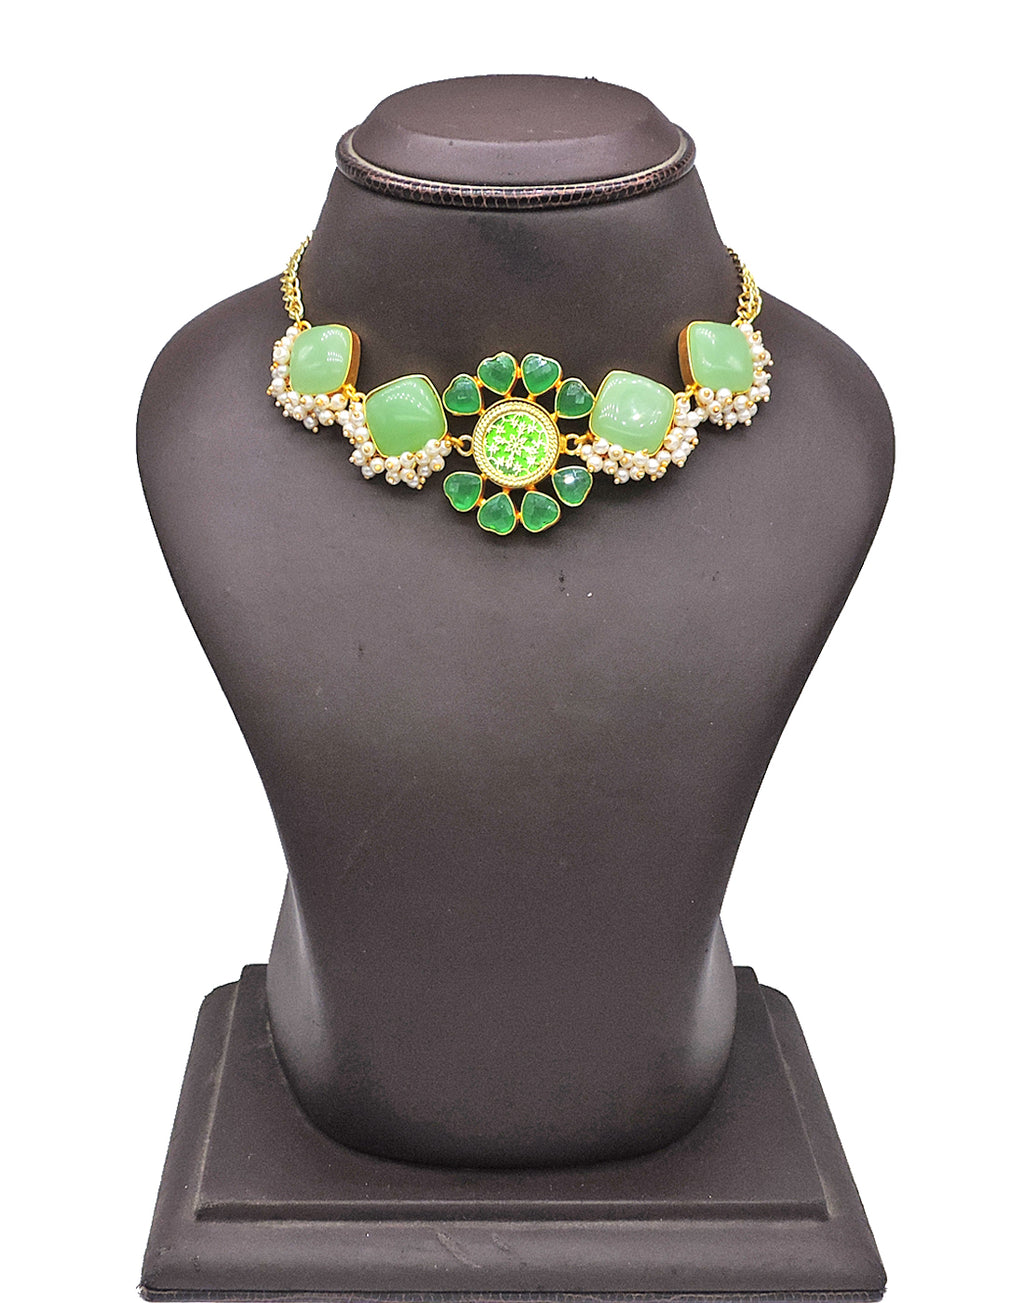 Green Flower Necklace - Statement Necklaces - Gold-Plated & Hypoallergenic Jewellery - Made in India - Dubai Jewellery - Dori